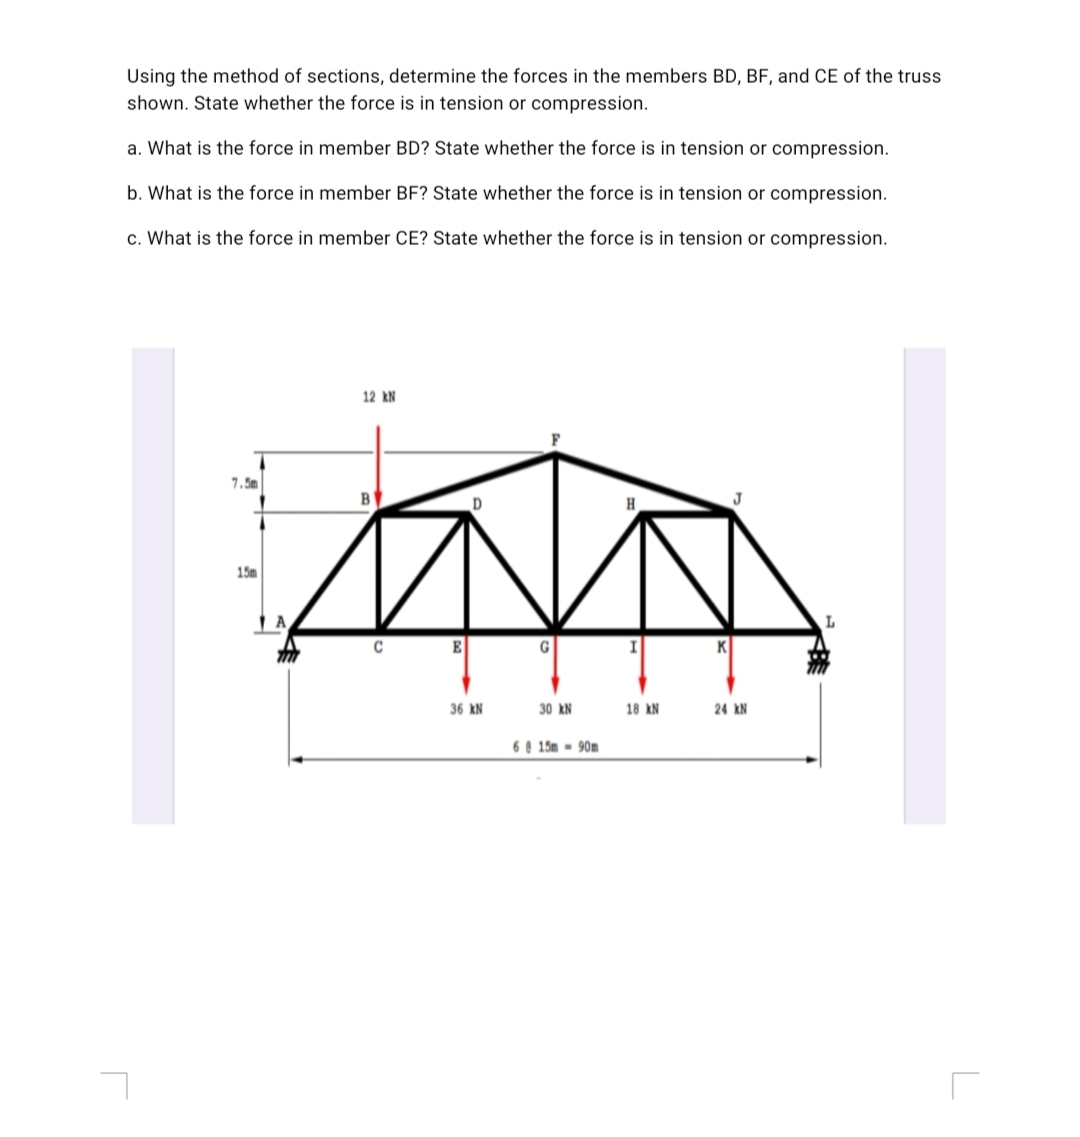 Using the method of sections, determine the forces in the members BD, BF, and CE of the truss
shown. State whether the force is in tension or compression.
a. What is the force in member BD? State whether the force is in tension or compression.
b. What is the force in member BF? State whether the force is in tension or compression.
c. What is the force in member CE? State whether the force is in tension or compression.
12 kN
D
J
15m
E
K
36 kN
30 kN
18 kN
24 kN
6 e 15m - 90m
